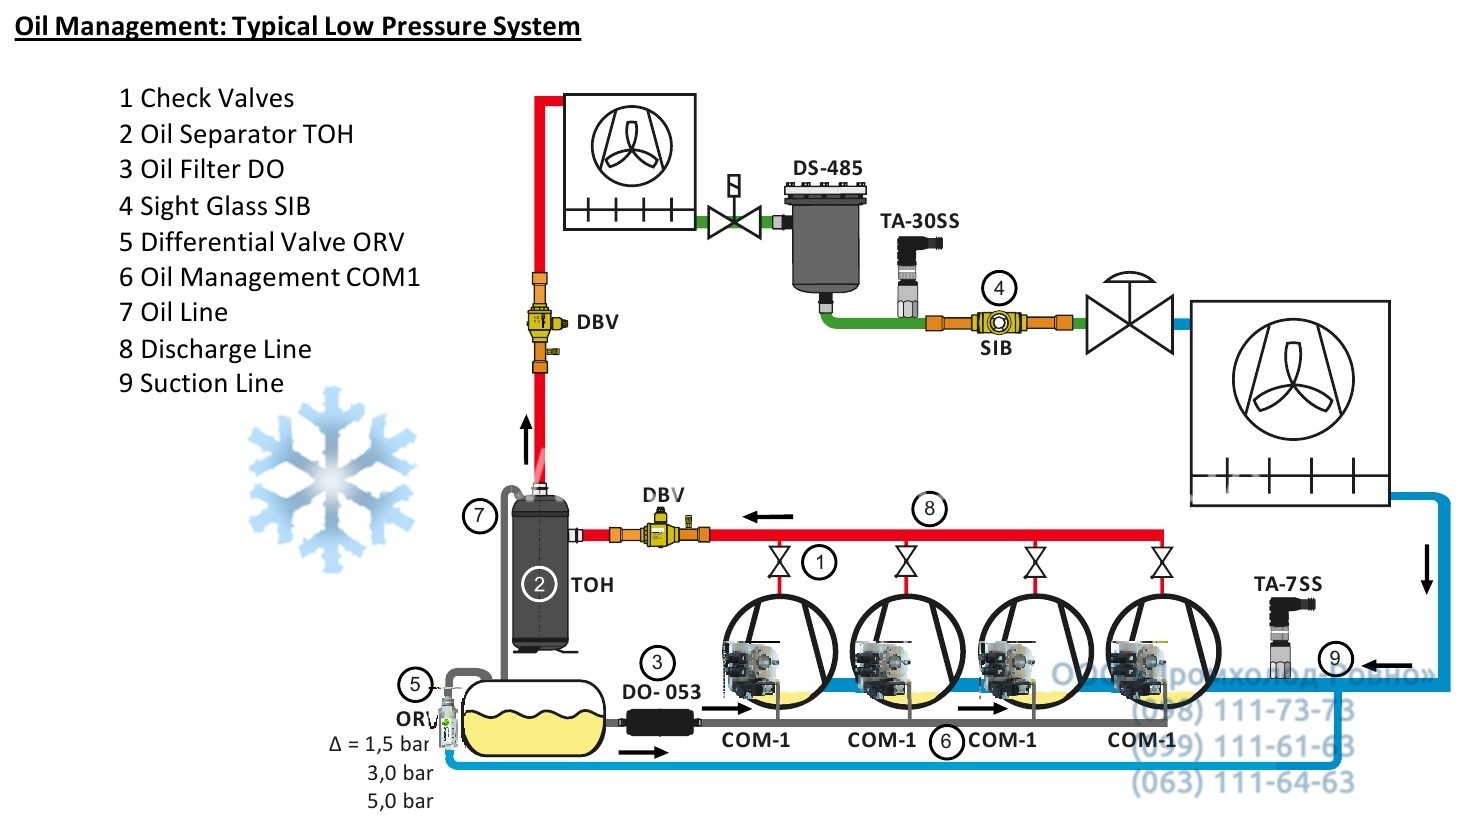 Oil Management Typical Low Pressure System